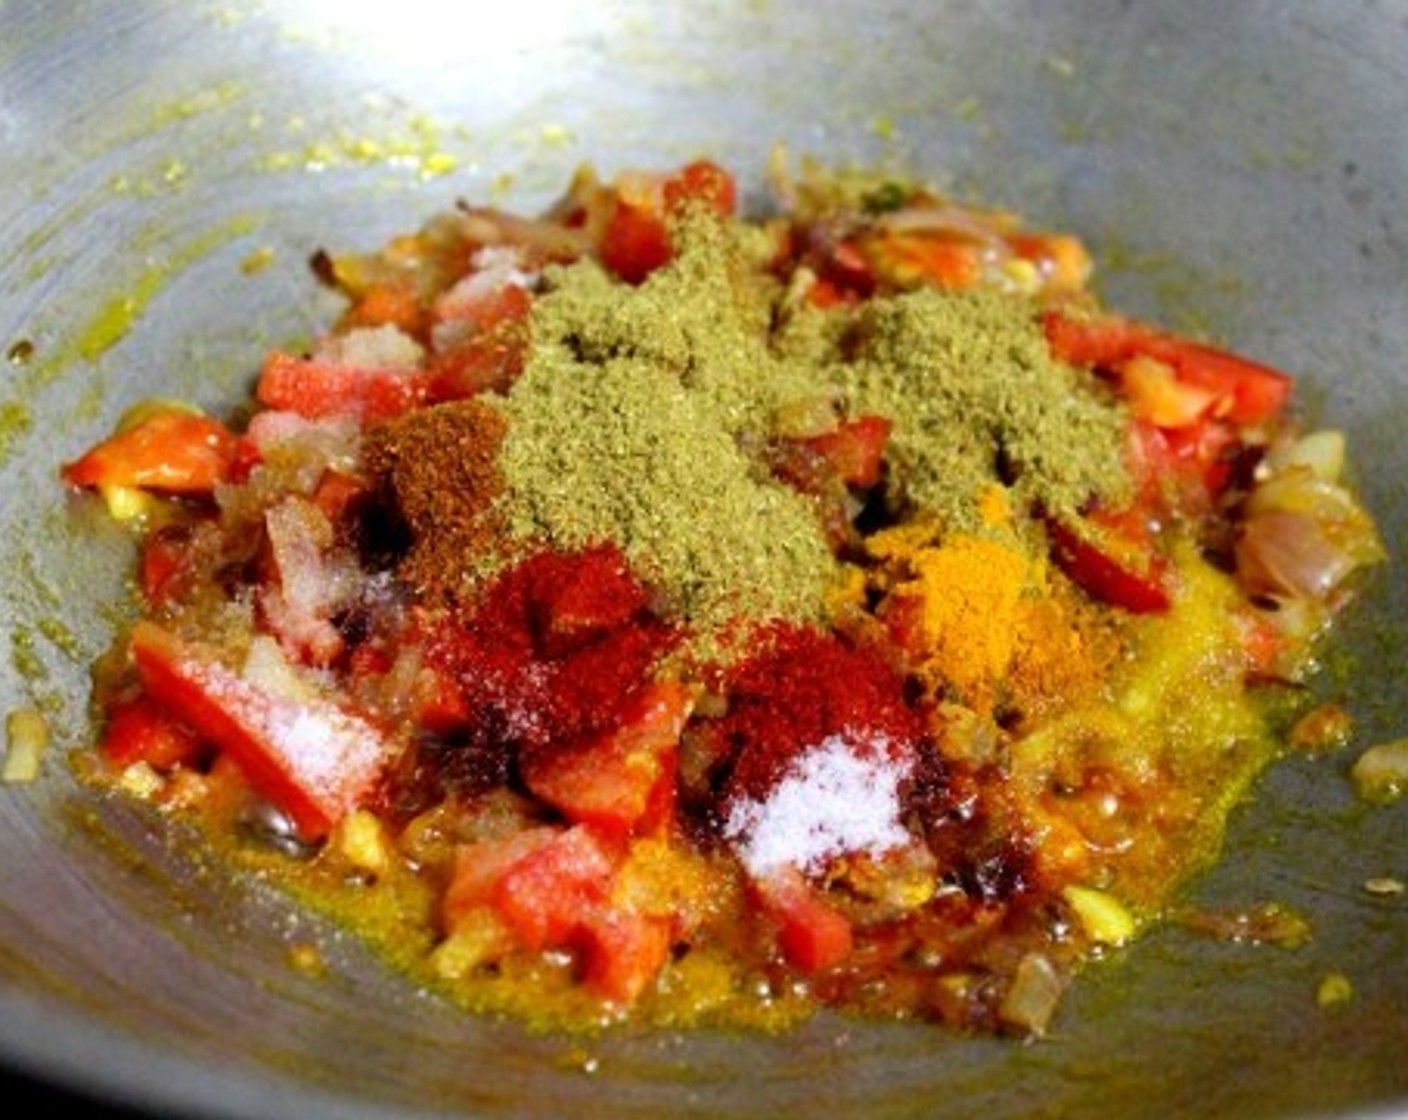 step 7 Add tomato, Green Peas (1/2 cup), Ground Coriander (1/2 Tbsp), Red Chili Powder (1/2 Tbsp), Garam Masala (1 tsp), Ground Turmeric (1/2 tsp) and cook till peas are done and oil begins to separate.